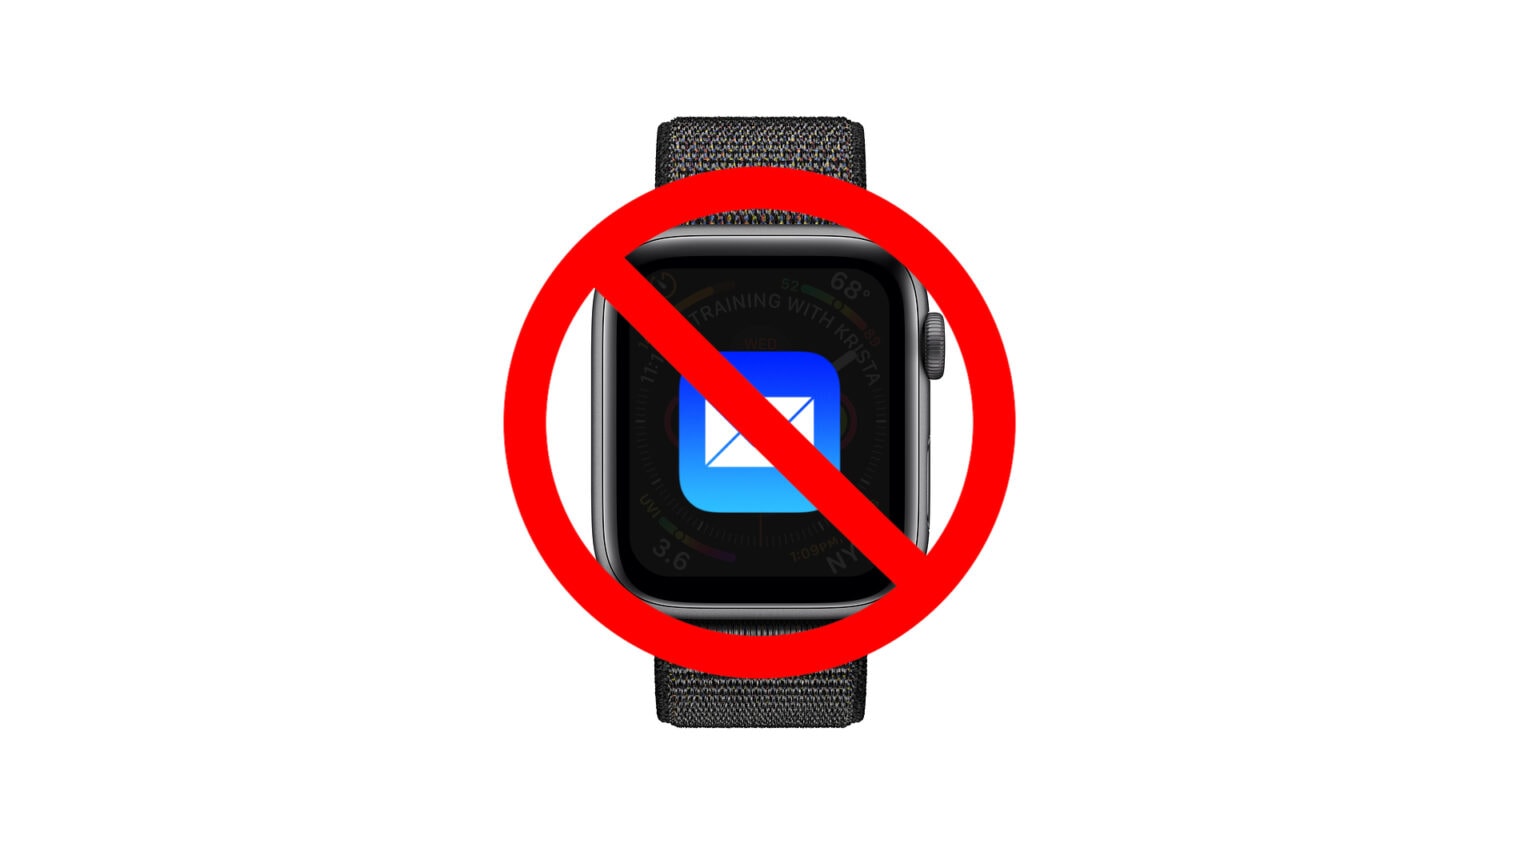 Mail Privacy Protection on Apple Watch